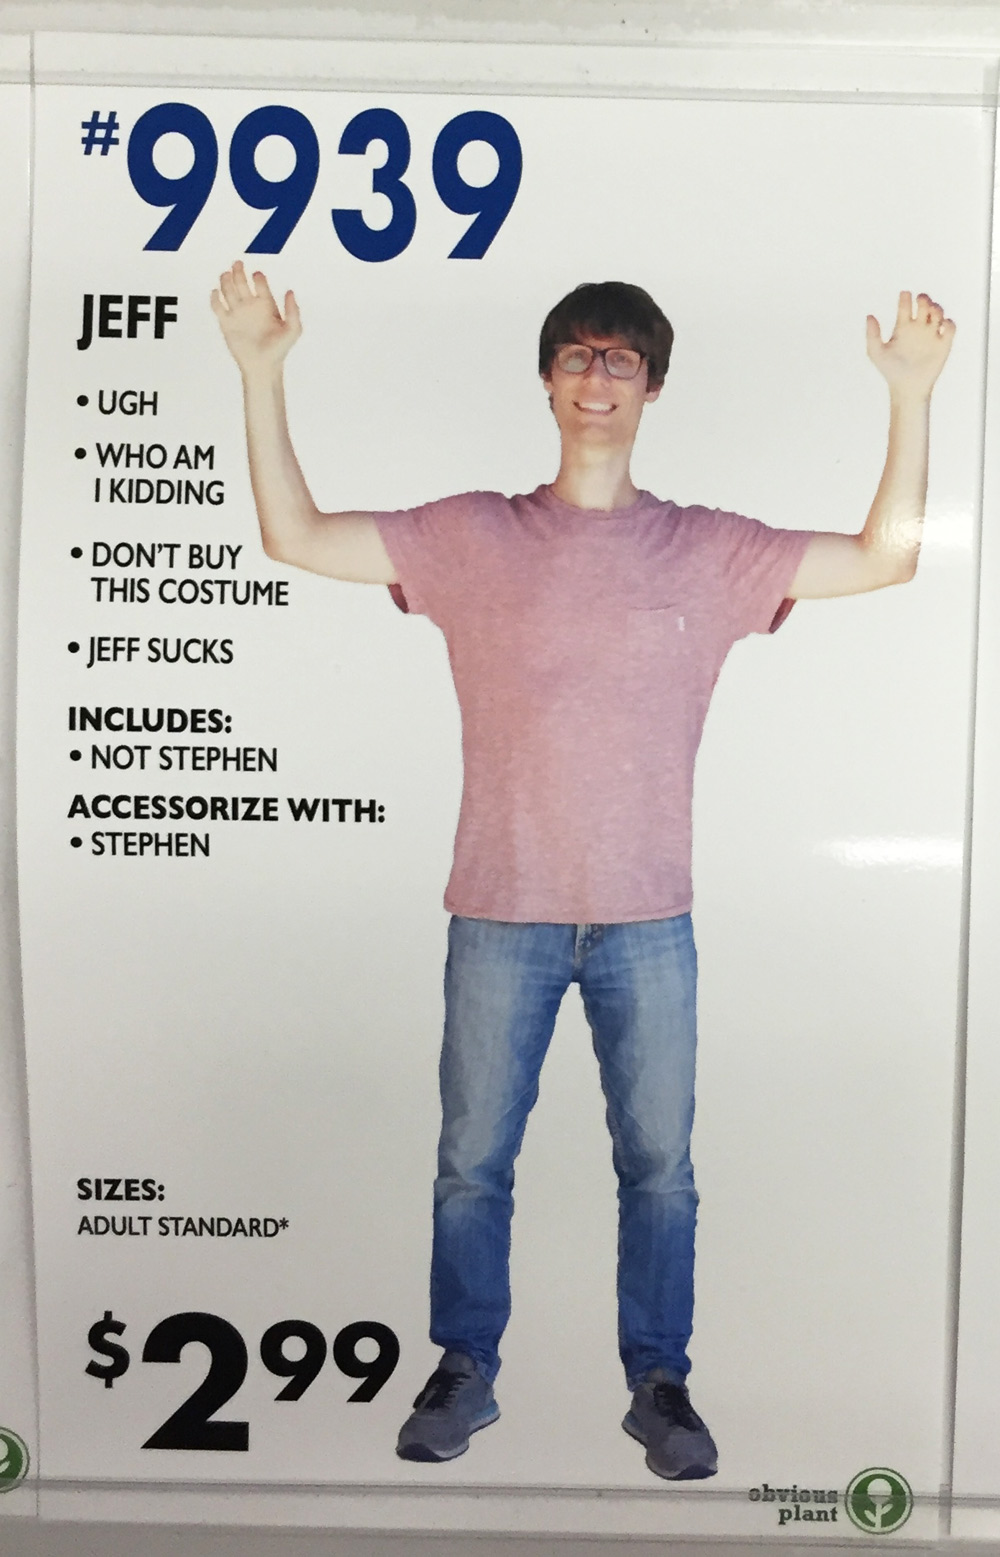 fake halloween costumes - 9939 Jeff Ugh Who Am I Kidding Don'T Buy This Costume Jeff Sucks Includes Not Stephen Accessorize With Stephen Sizes Adult Standard $299 obvious plant